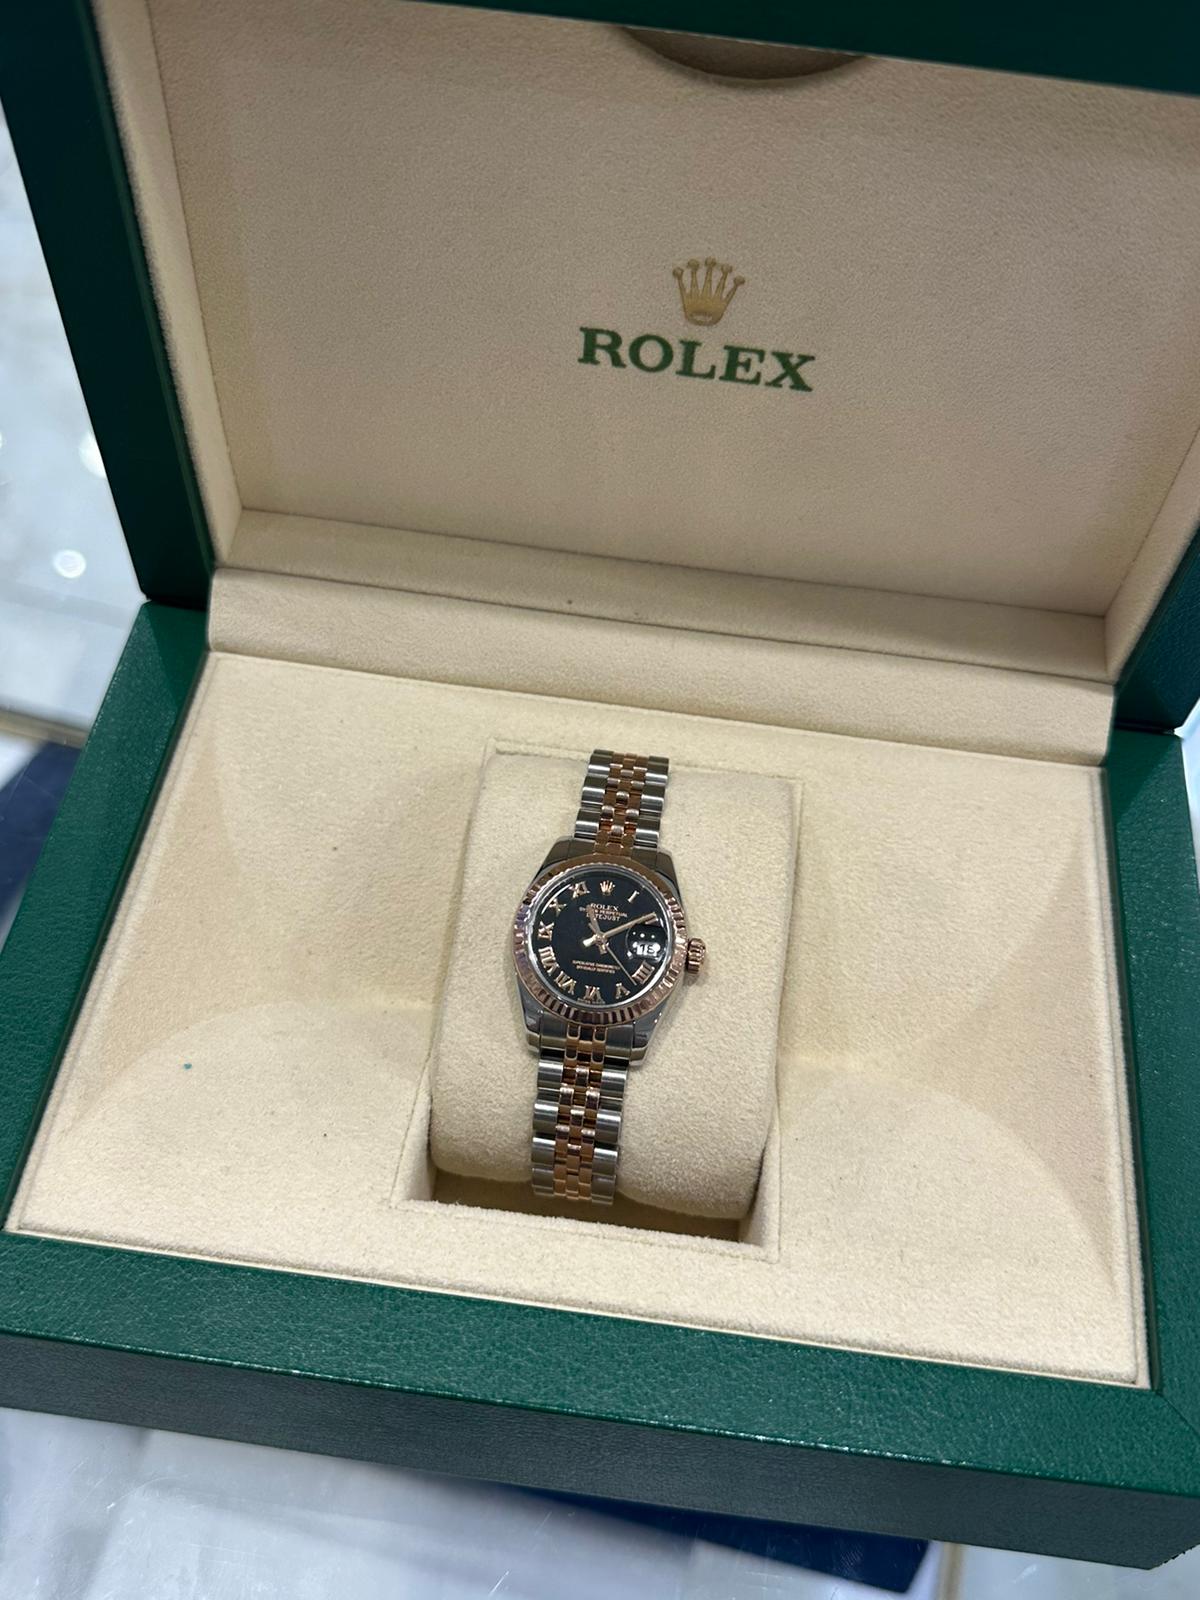 Rolex Datejust 26mm steel and rose gold - 179171 2 - Image 4 of 10